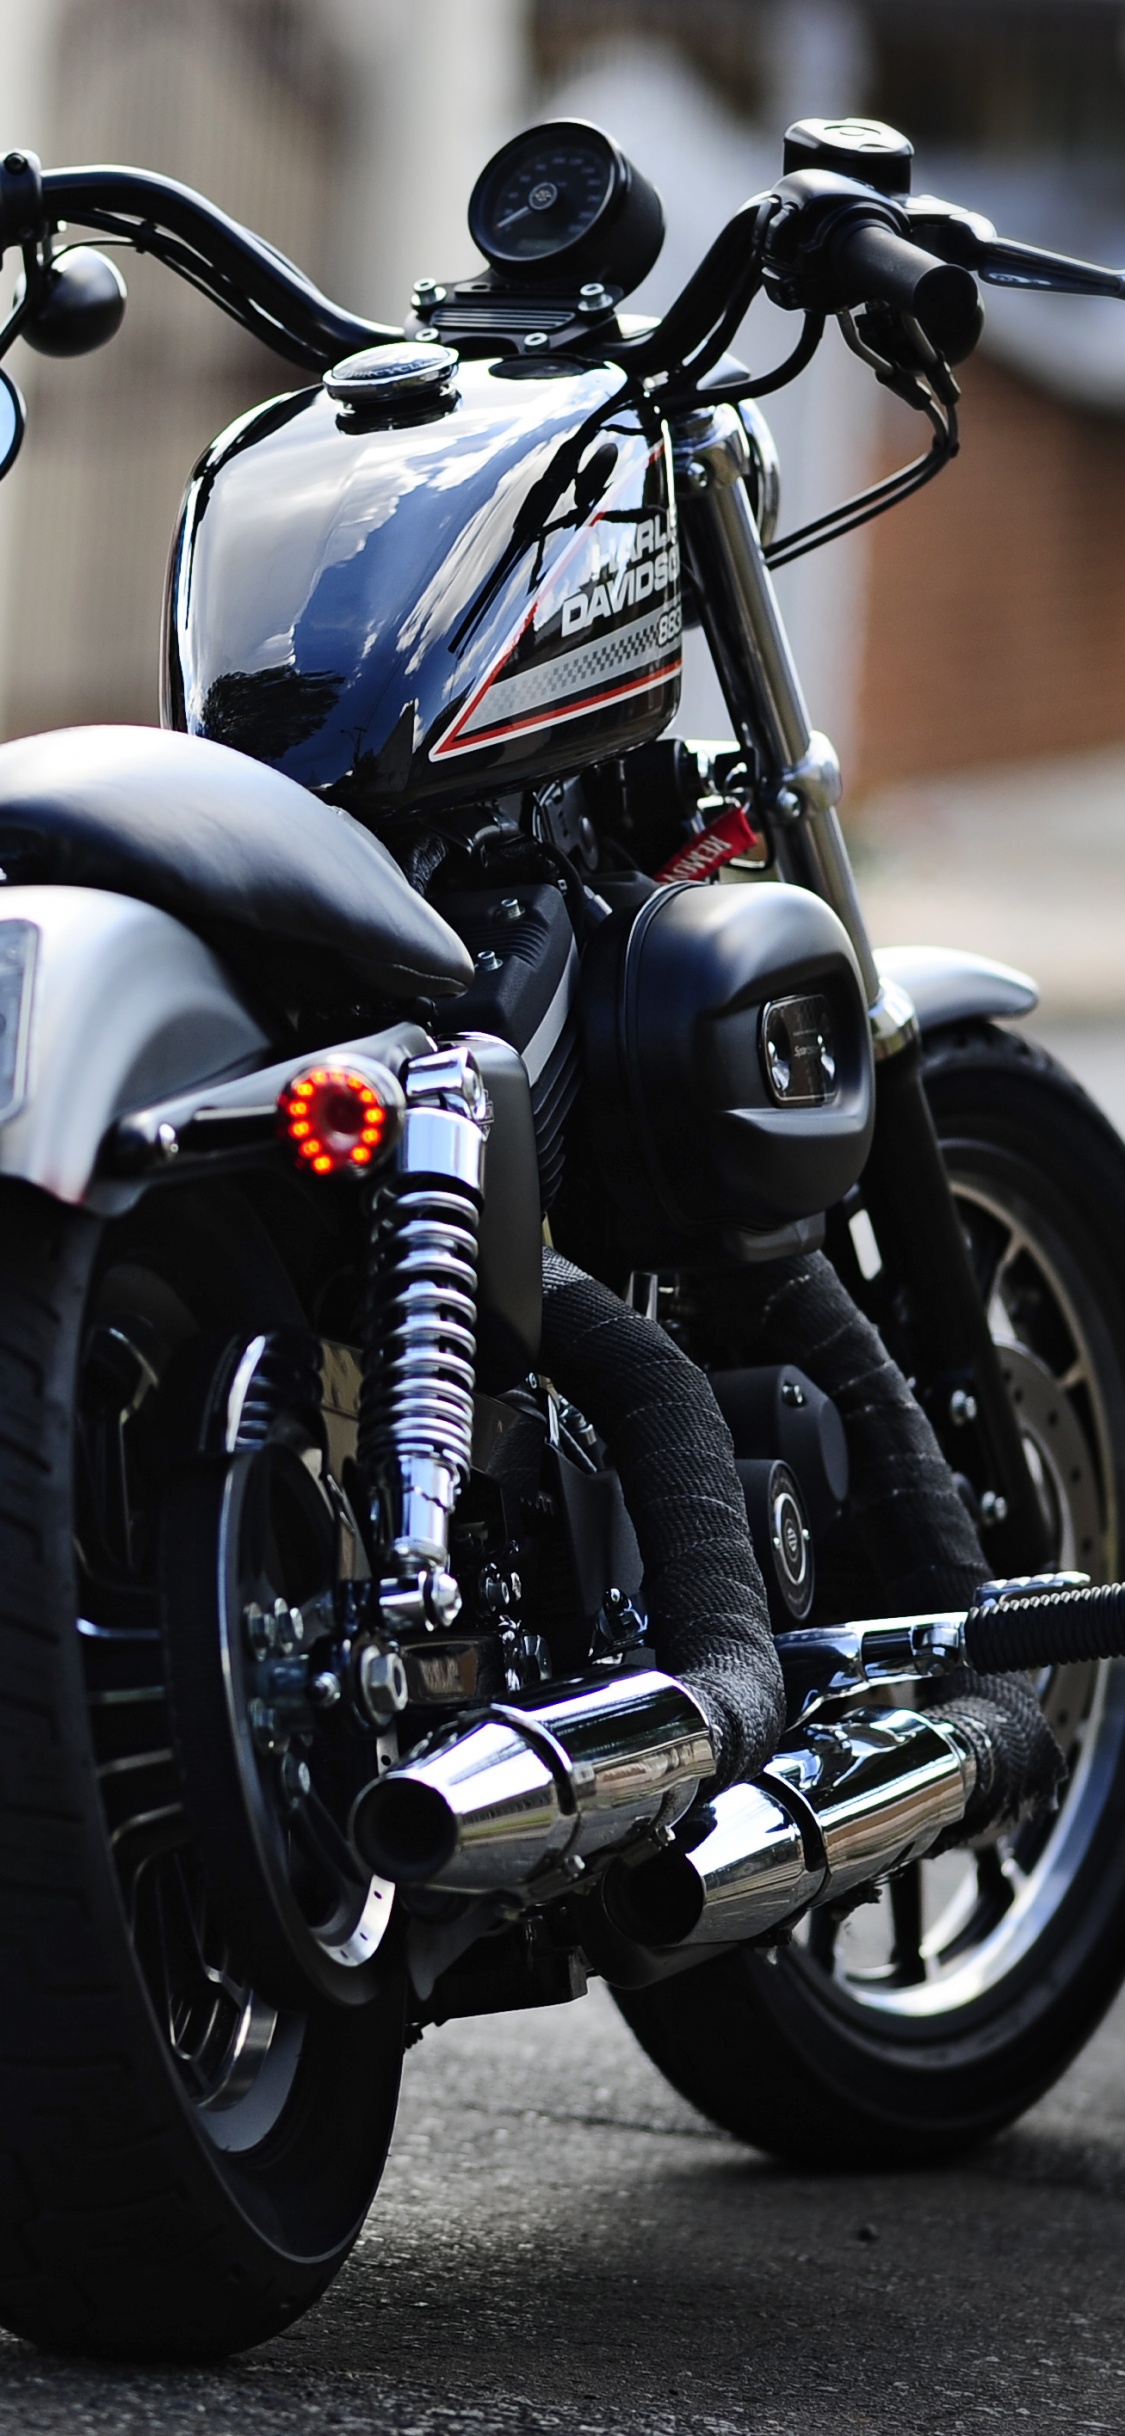 Black Cruiser Motorcycle on Road During Daytime. Wallpaper in 1125x2436 Resolution